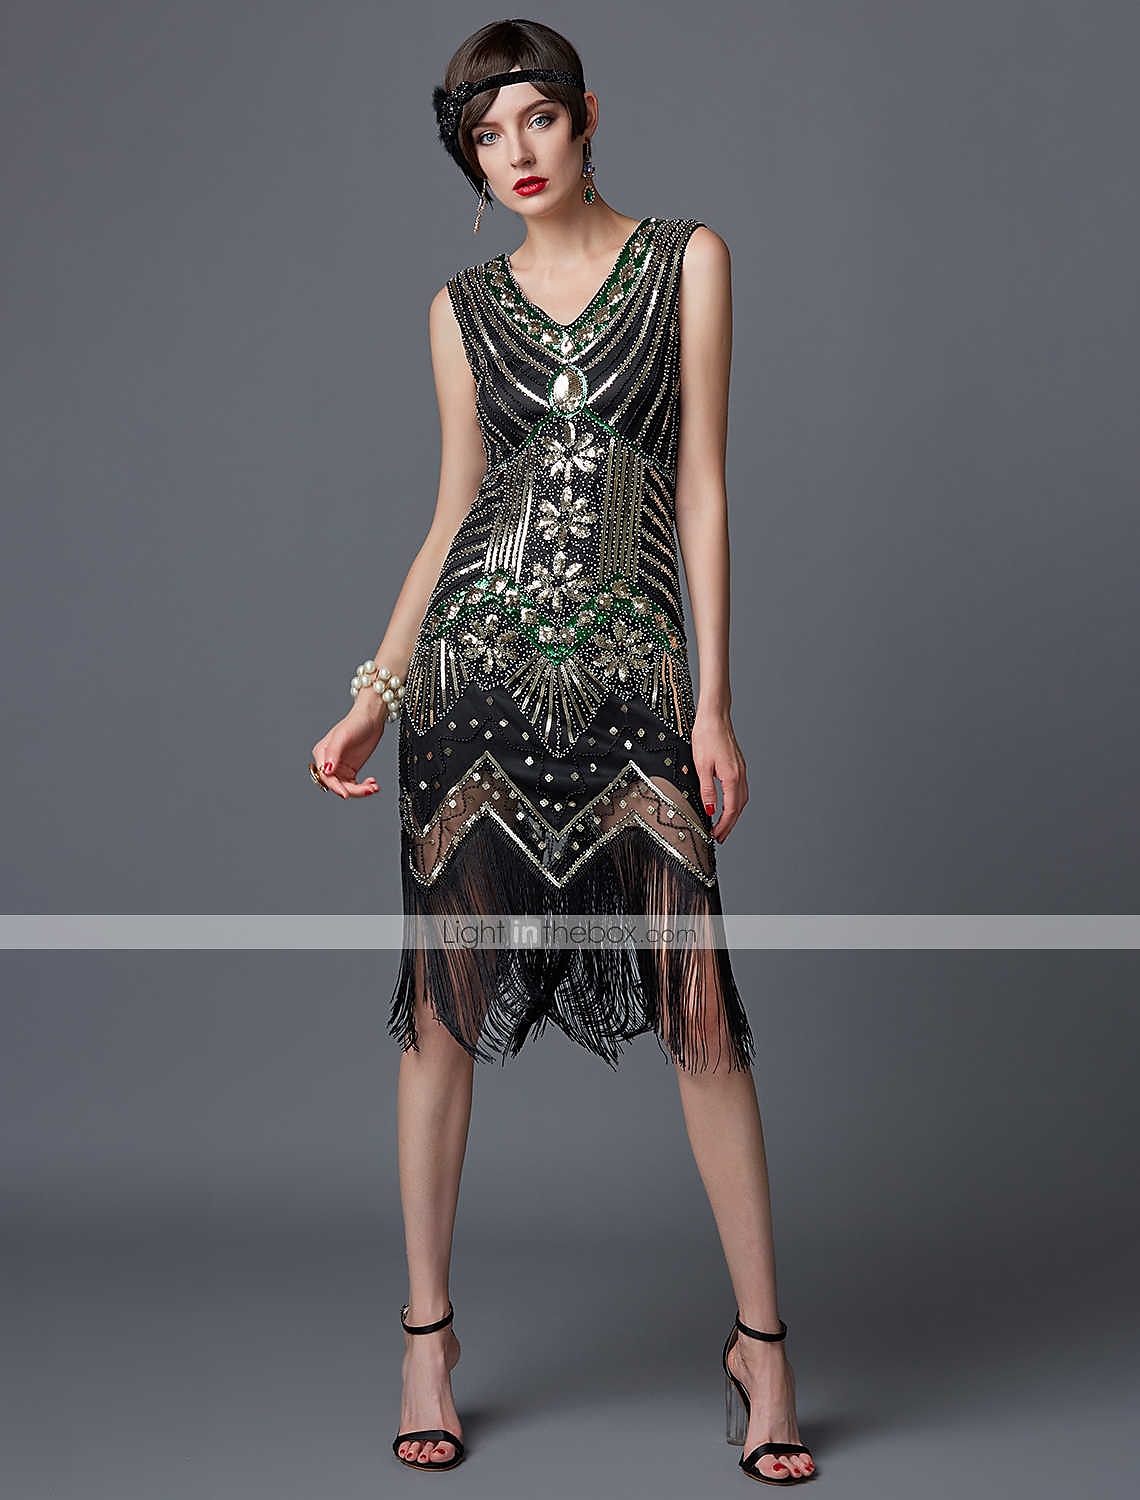 The Great Gatsby 1920s Vintage Dress Flapper Femmes Paillettes Costume  Cosplay Party